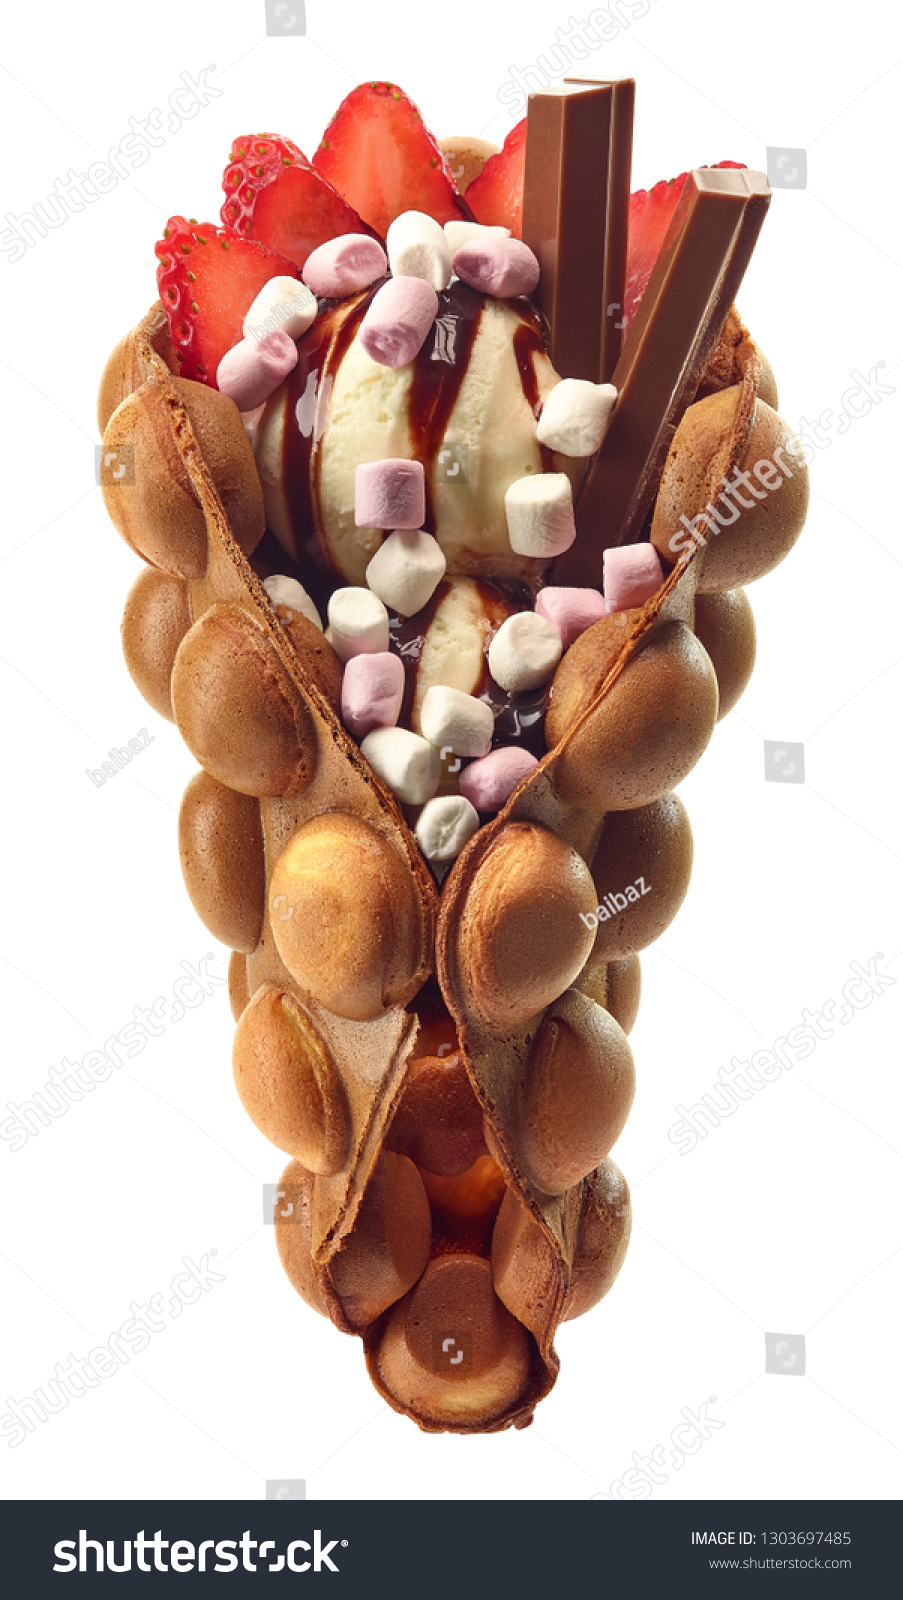 Hong kong or bubble waffle with ice cream, chocolate, marshmallows and strawberries isolated on white background #1303697485